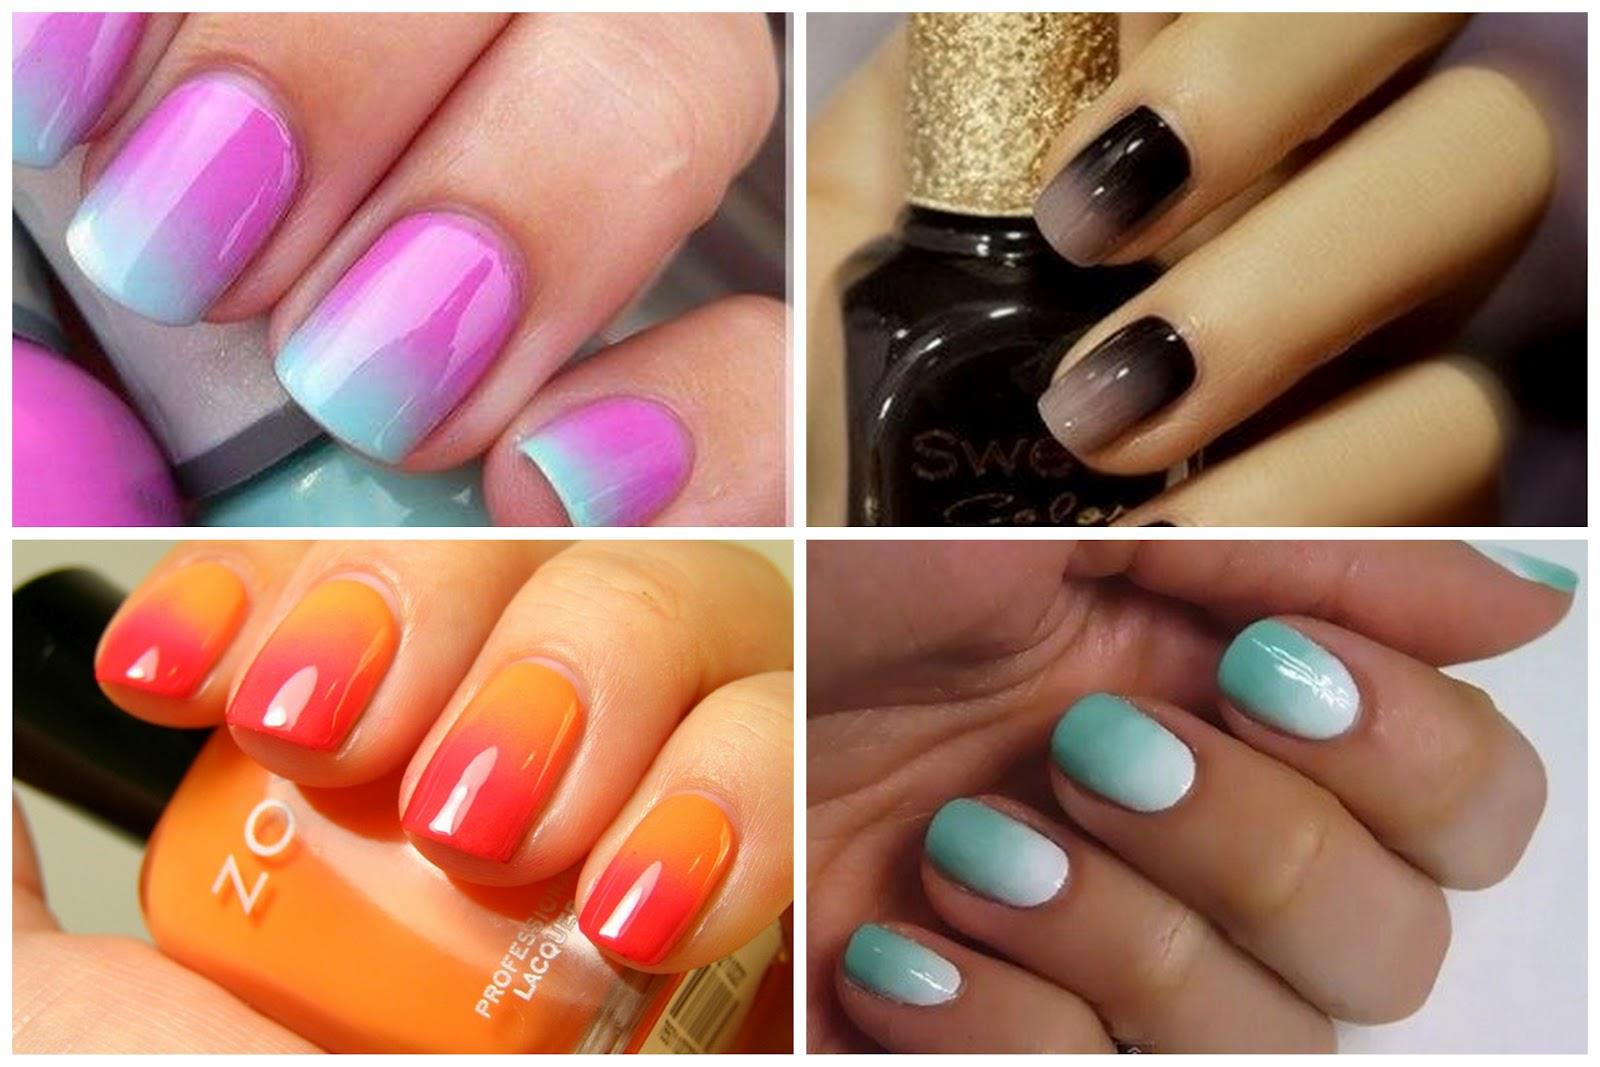 8. Step-by-Step Ombre Nail Tutorial - wide 5